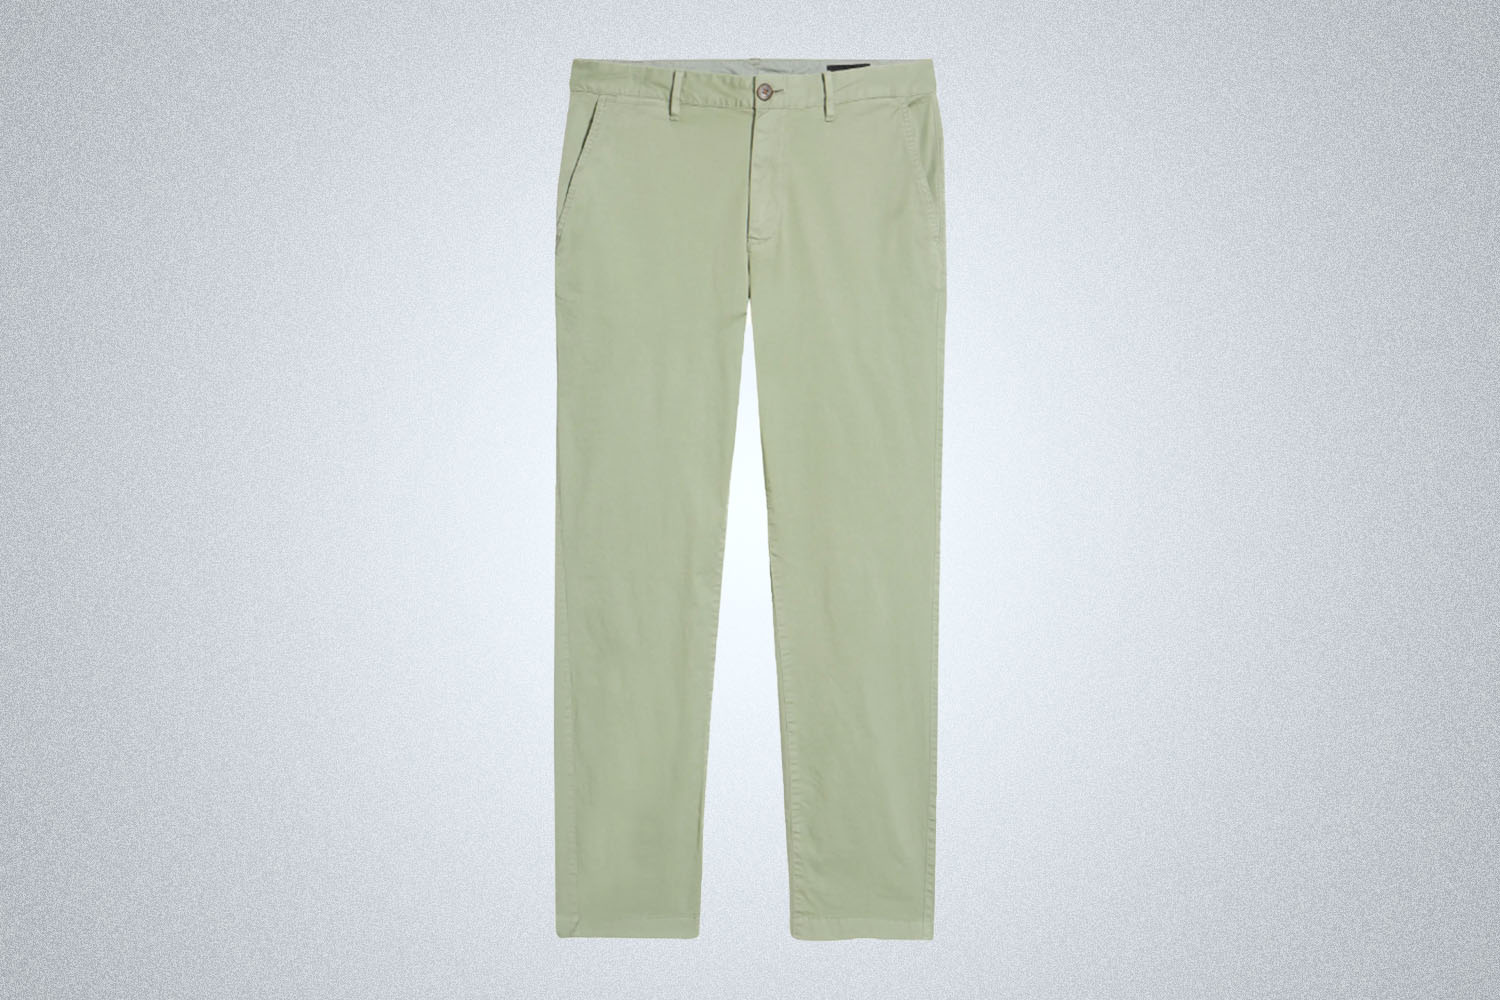 a pair of light green chinos from Bonobos on a grey background